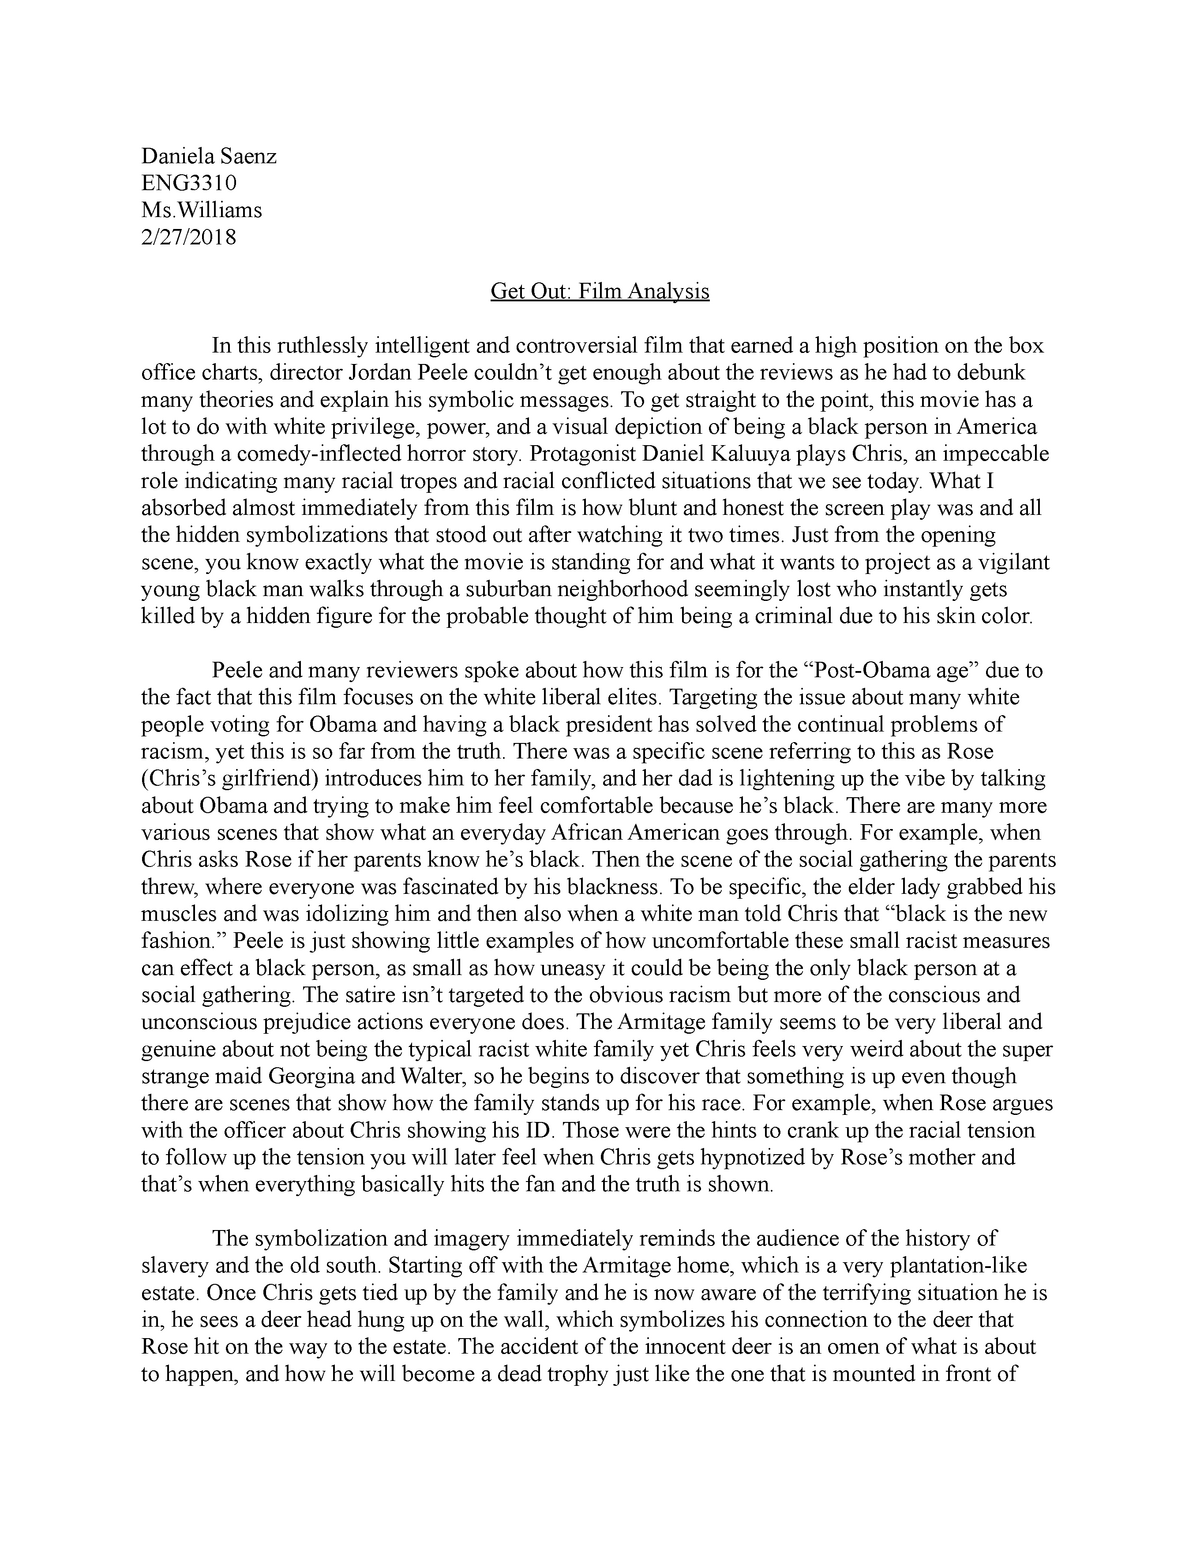 get out film analysis essay